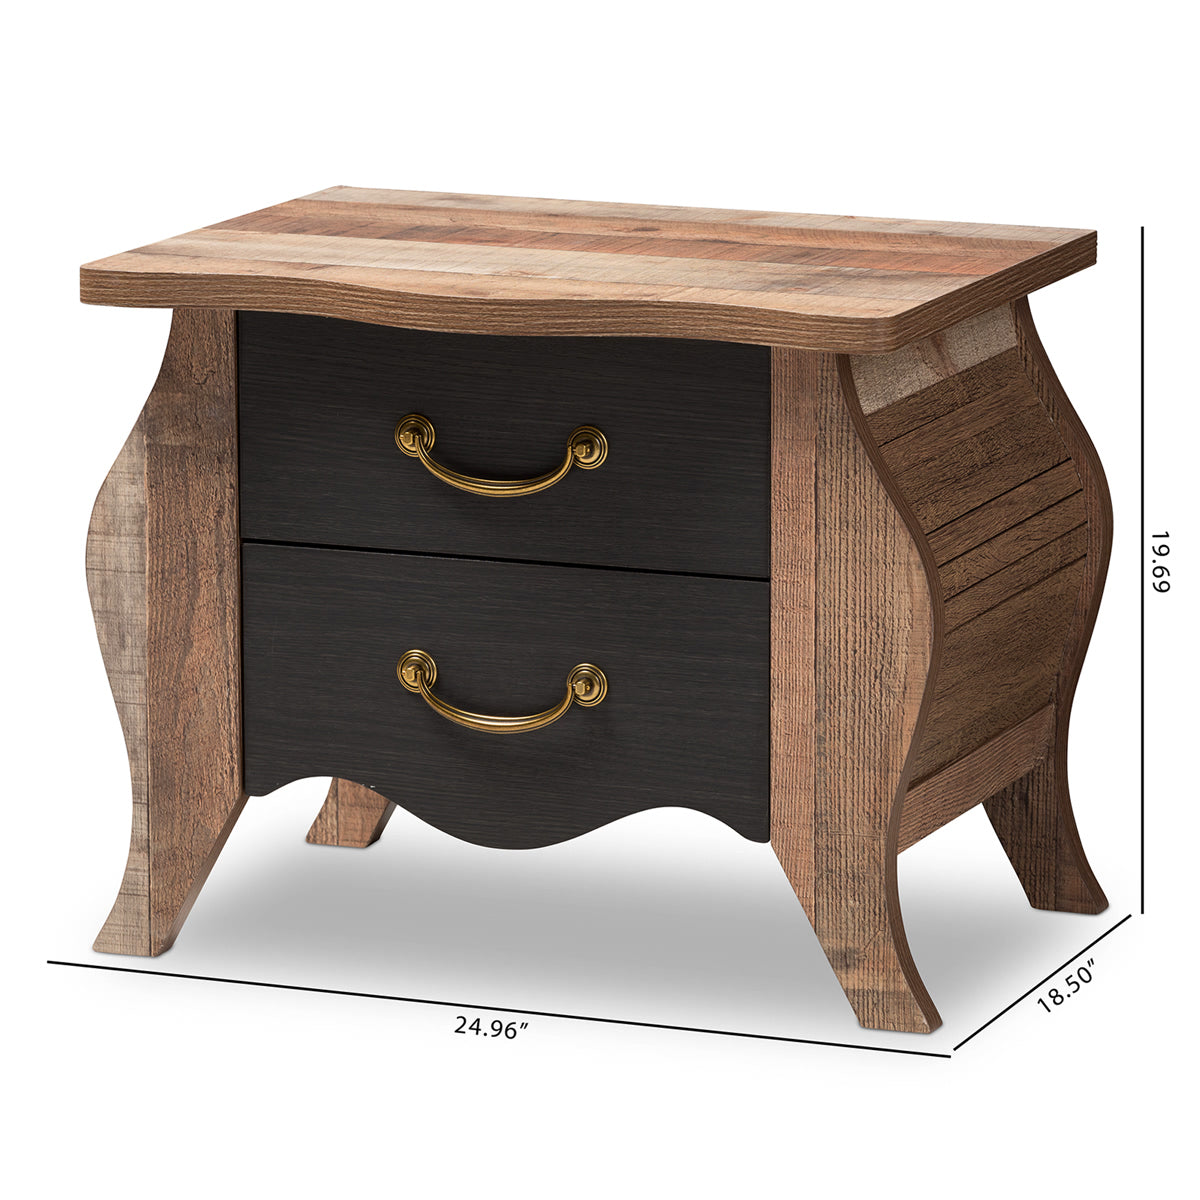 Baxton Studio Romilly Country Cottage Farmhouse Black and Oak-Finished Wood 2-Drawer Nightstand Baxton Studio-nightstands-Minimal And Modern - 2